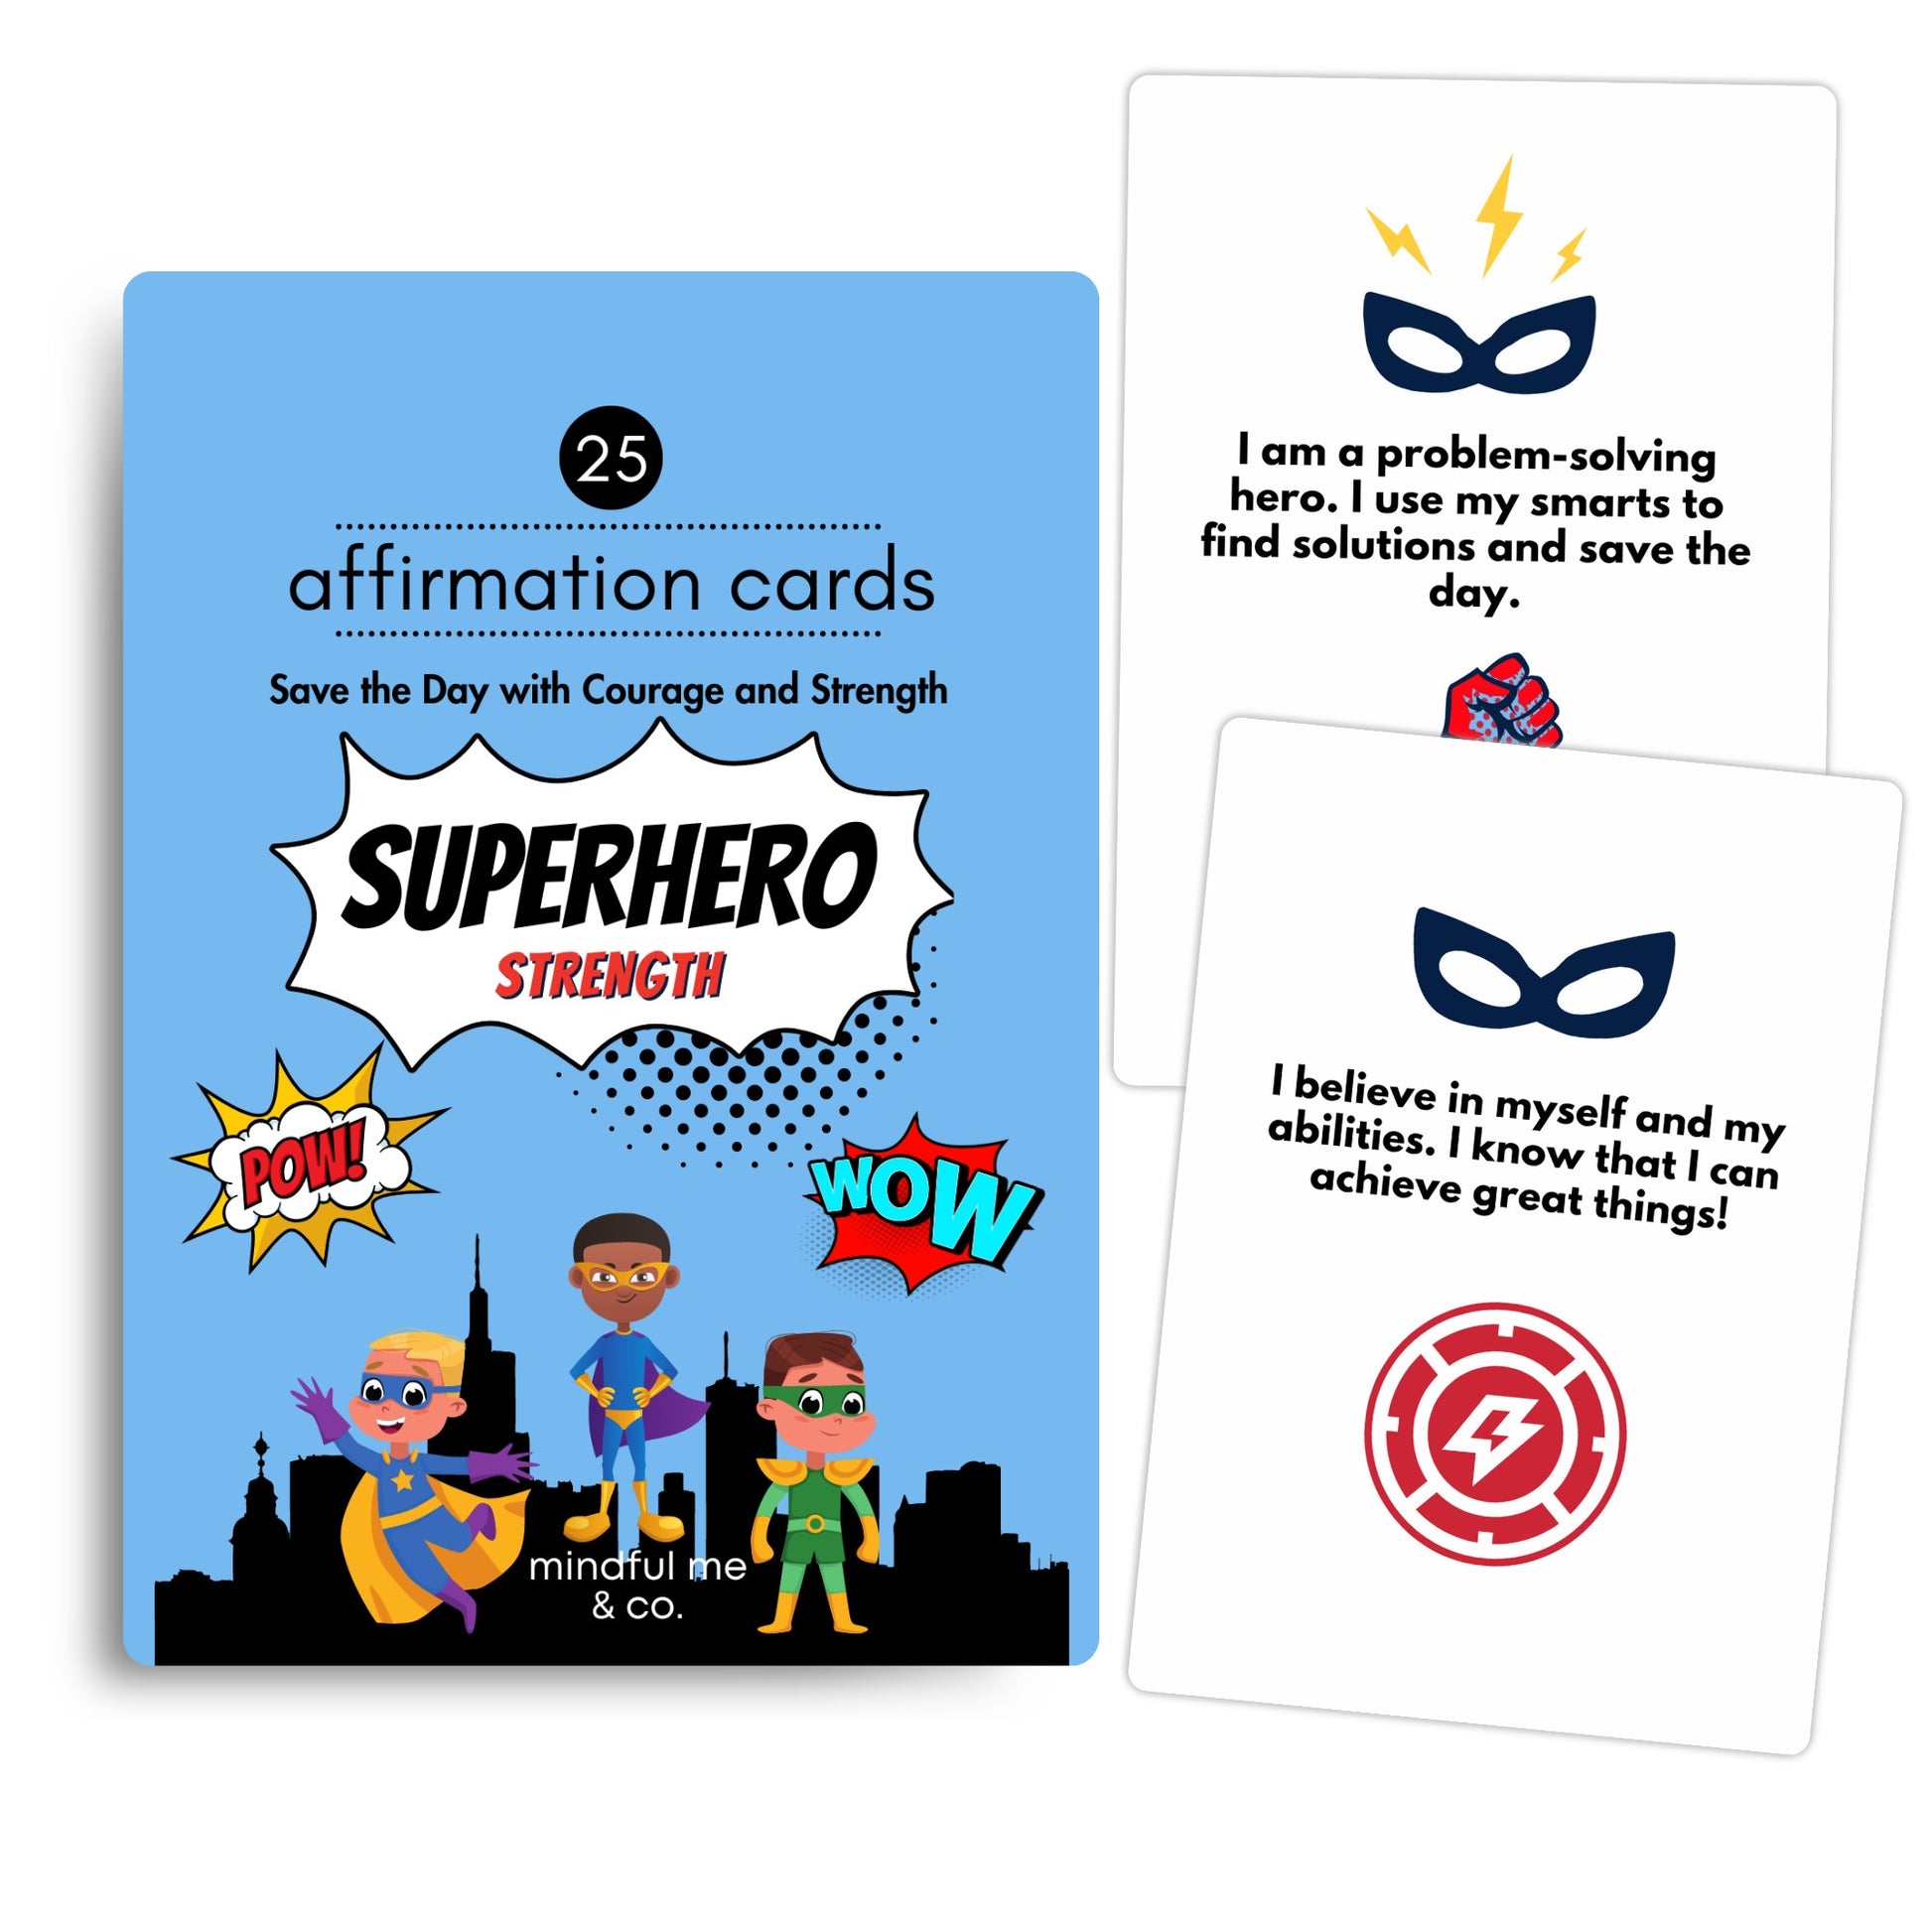 Affirmation cards for boys Positive Daily Affirmations for kids boy gifts empower Confidence positive mindset superhero 